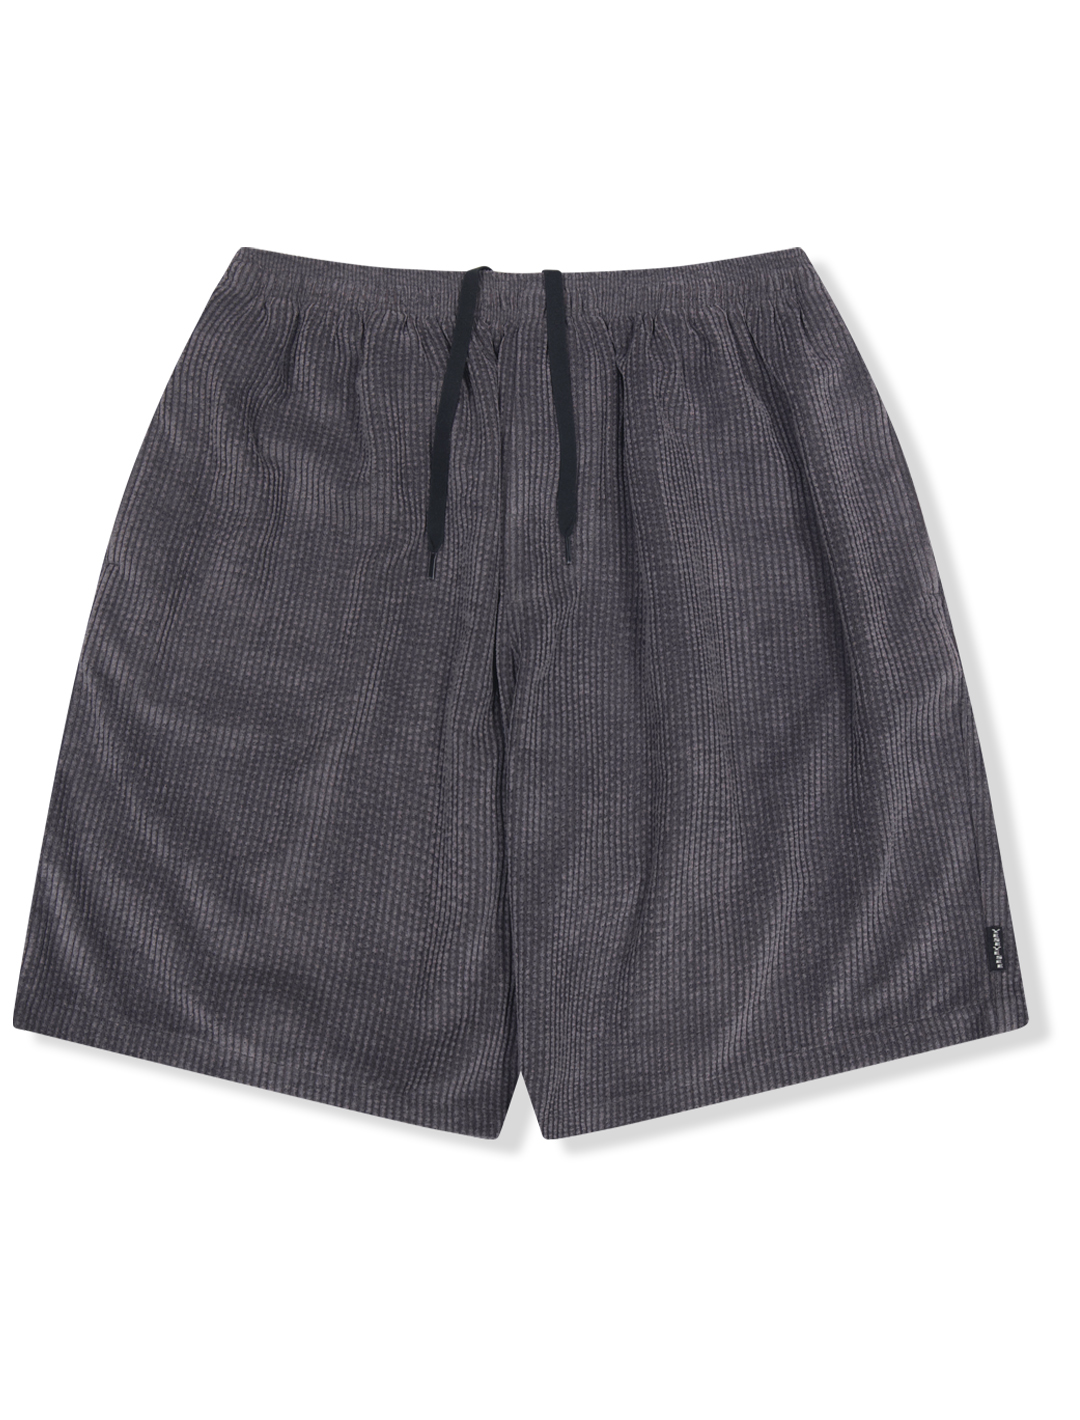 Y.E.S Cord Shorts Charcoal